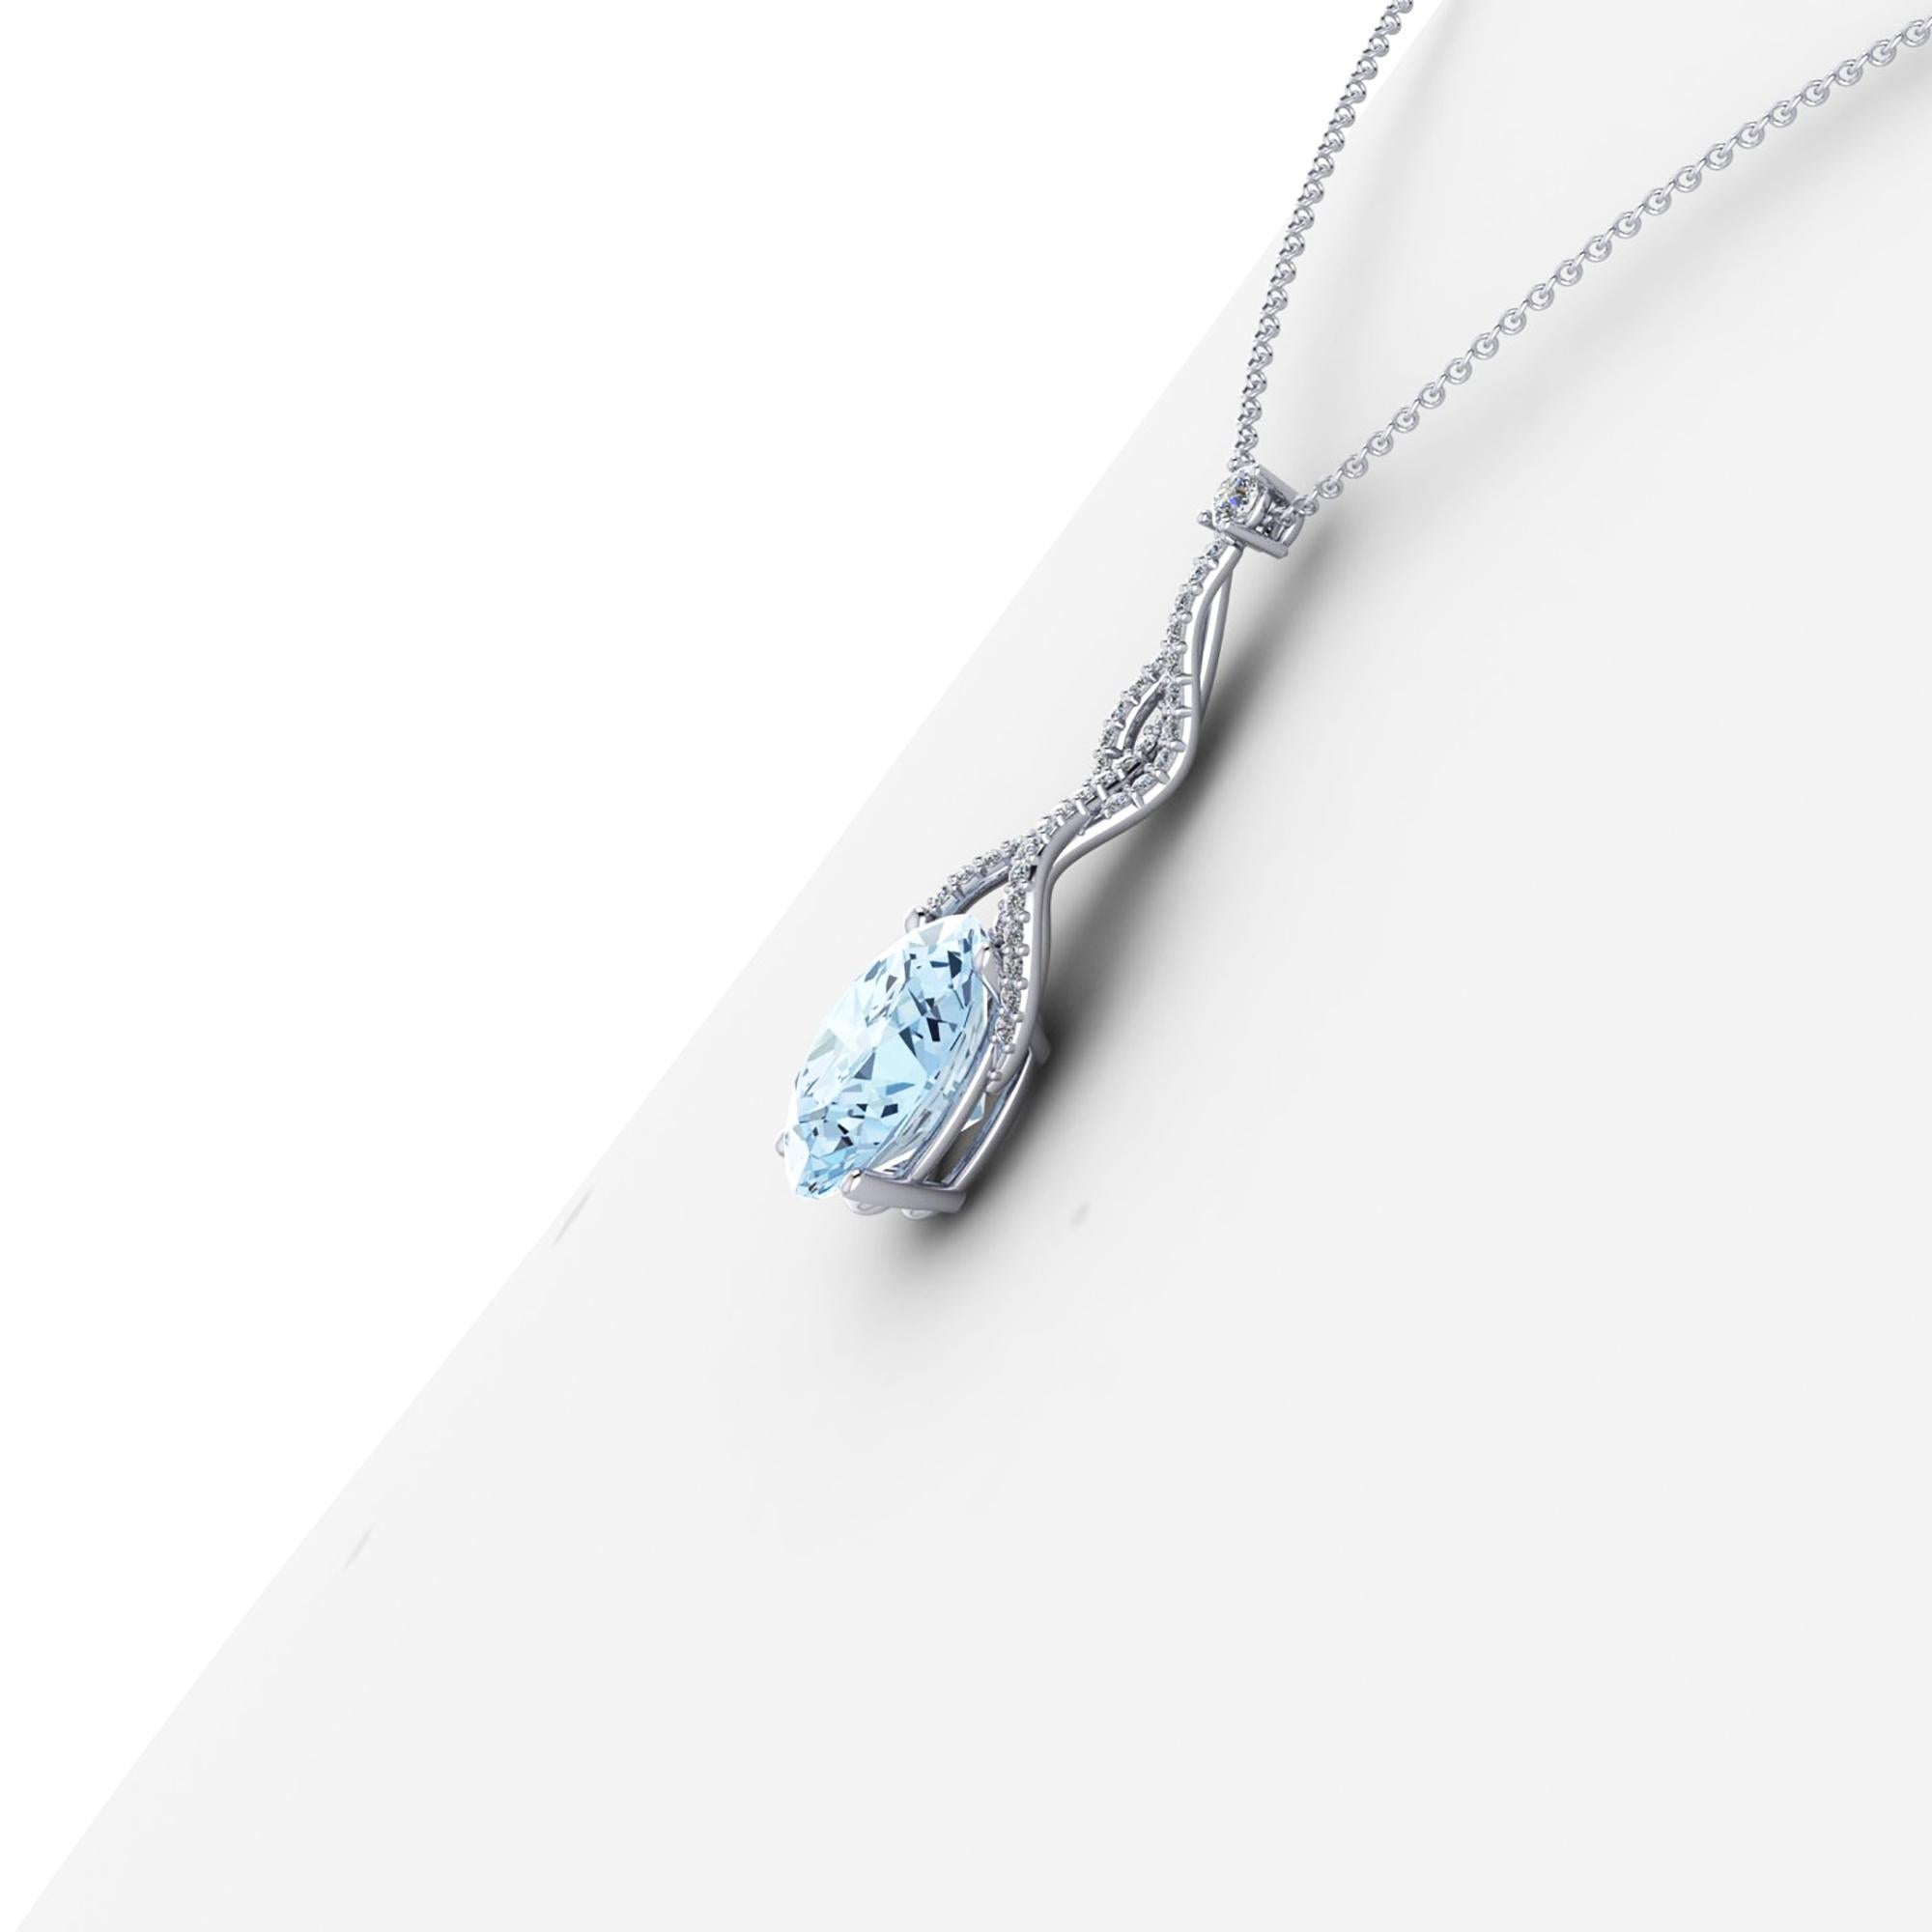 2.21 carat blue Oval Aquamarine in a 18k white gold and 0.20 carat weight diamonds pendant necklace,
conceived in a flowing, organic design to recall the beauty of waterfalls and the source of life. 
This design showcase delicate lines, flowing